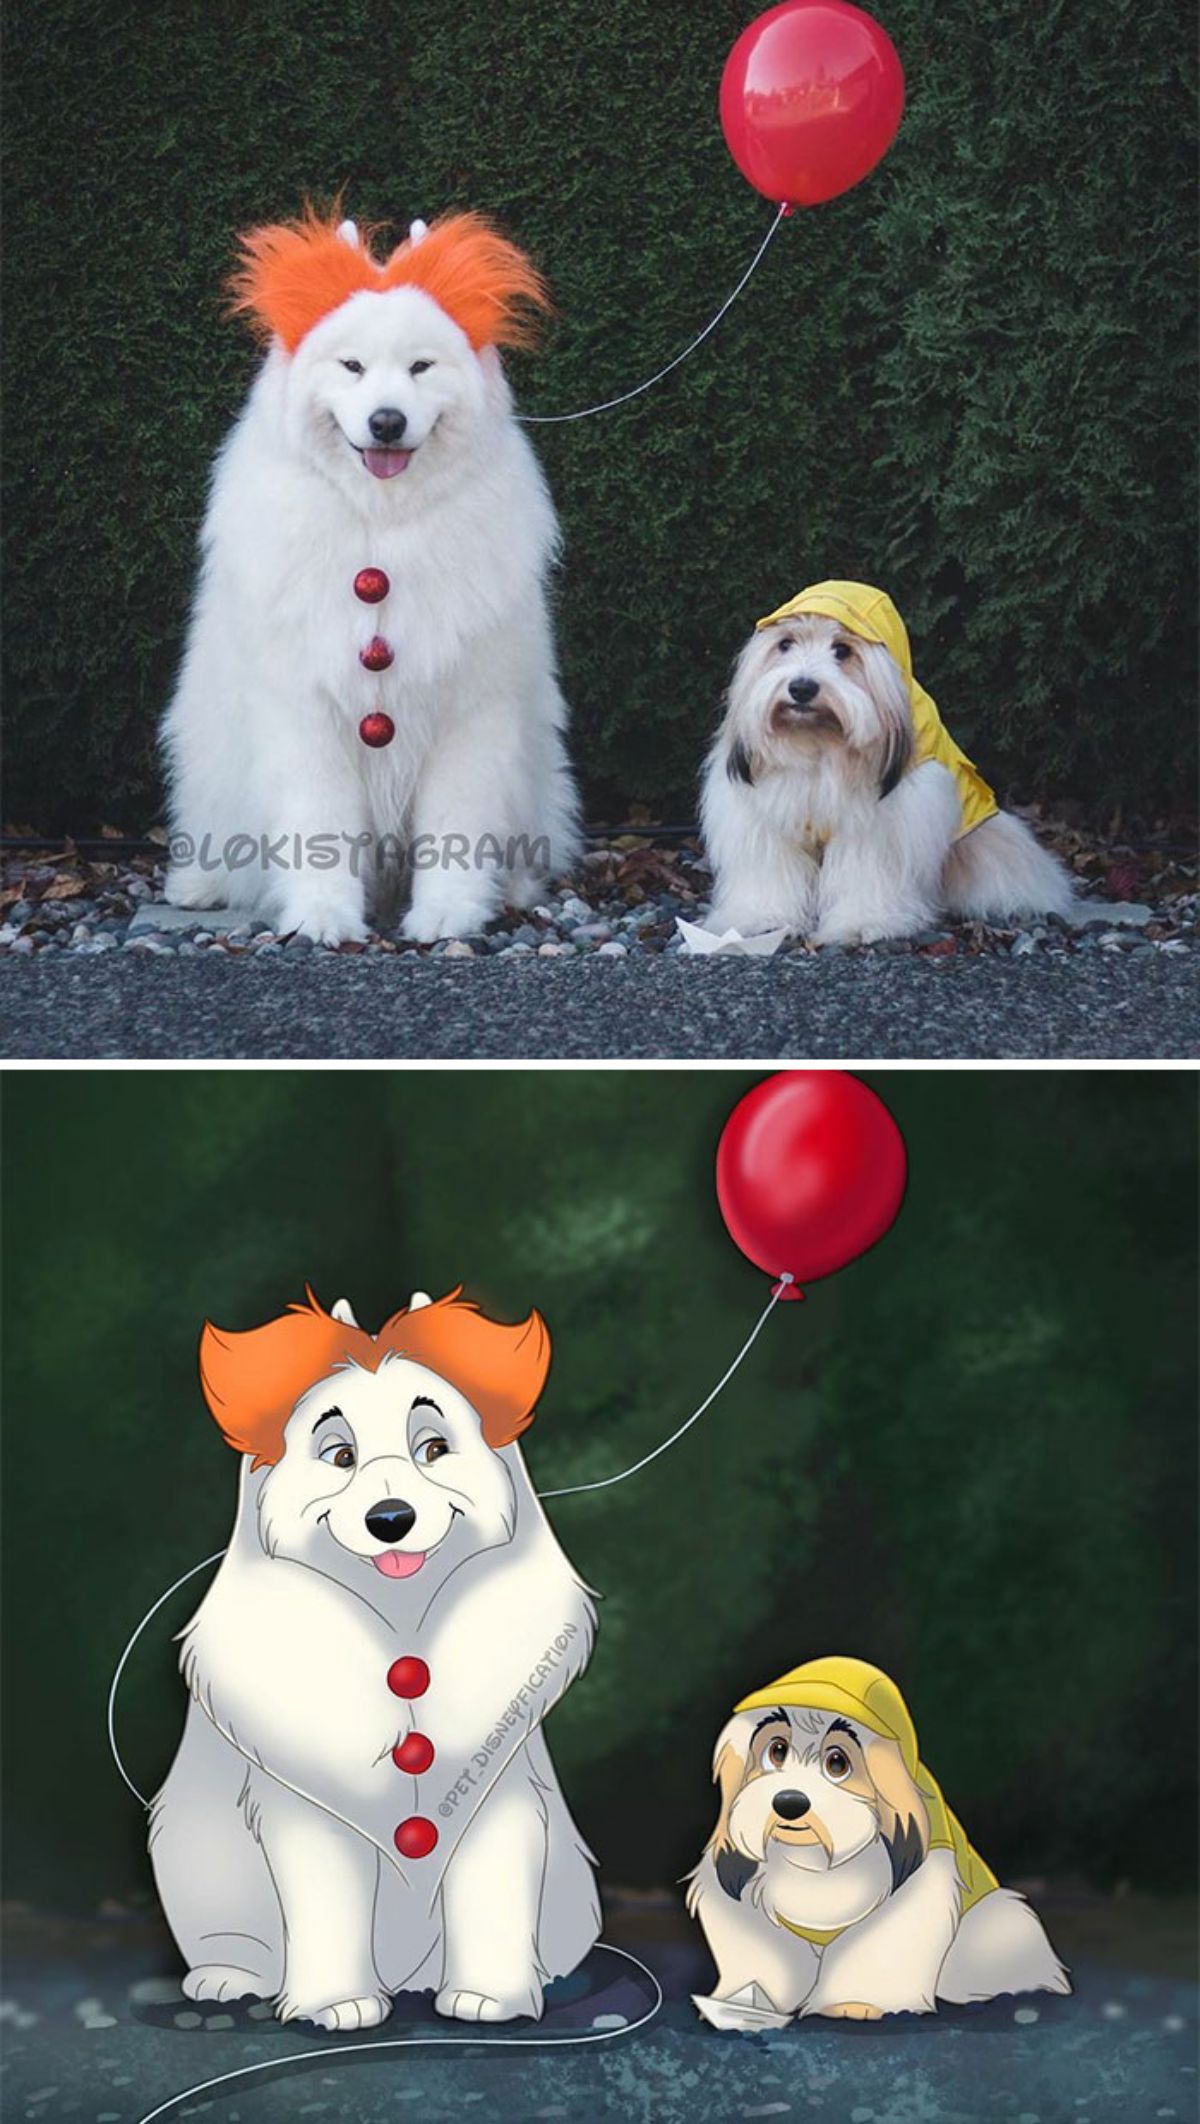 real photo and cartoon image of a large white fluffy dog wearing an orange wig with a red balloon and a small fluffy white dog wearing a yellow hoodie